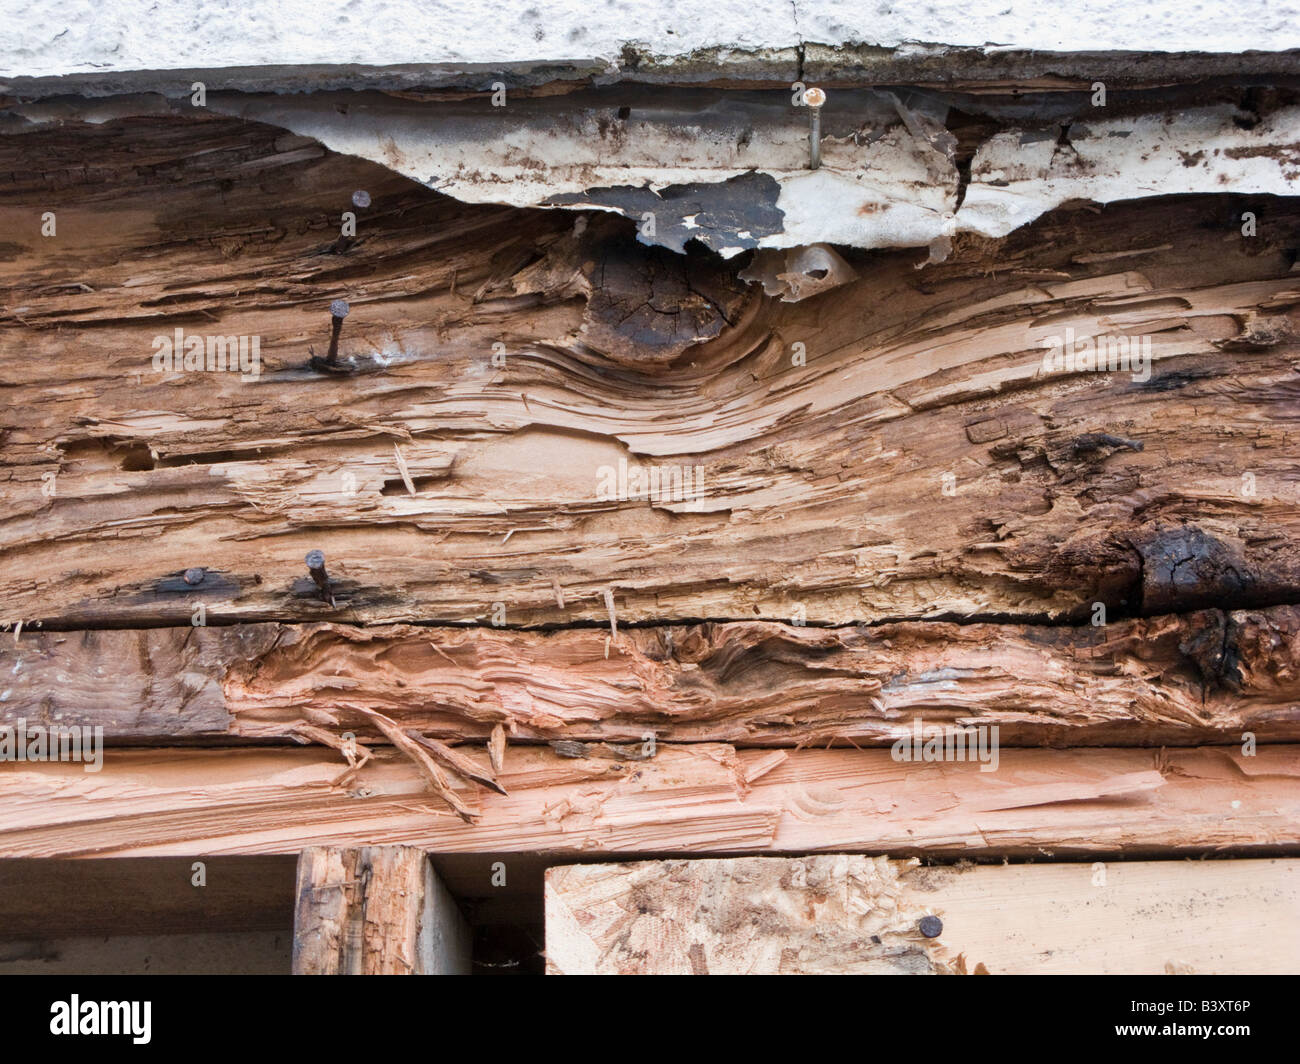 carpenter ant damage in wooden beams Stock Photo